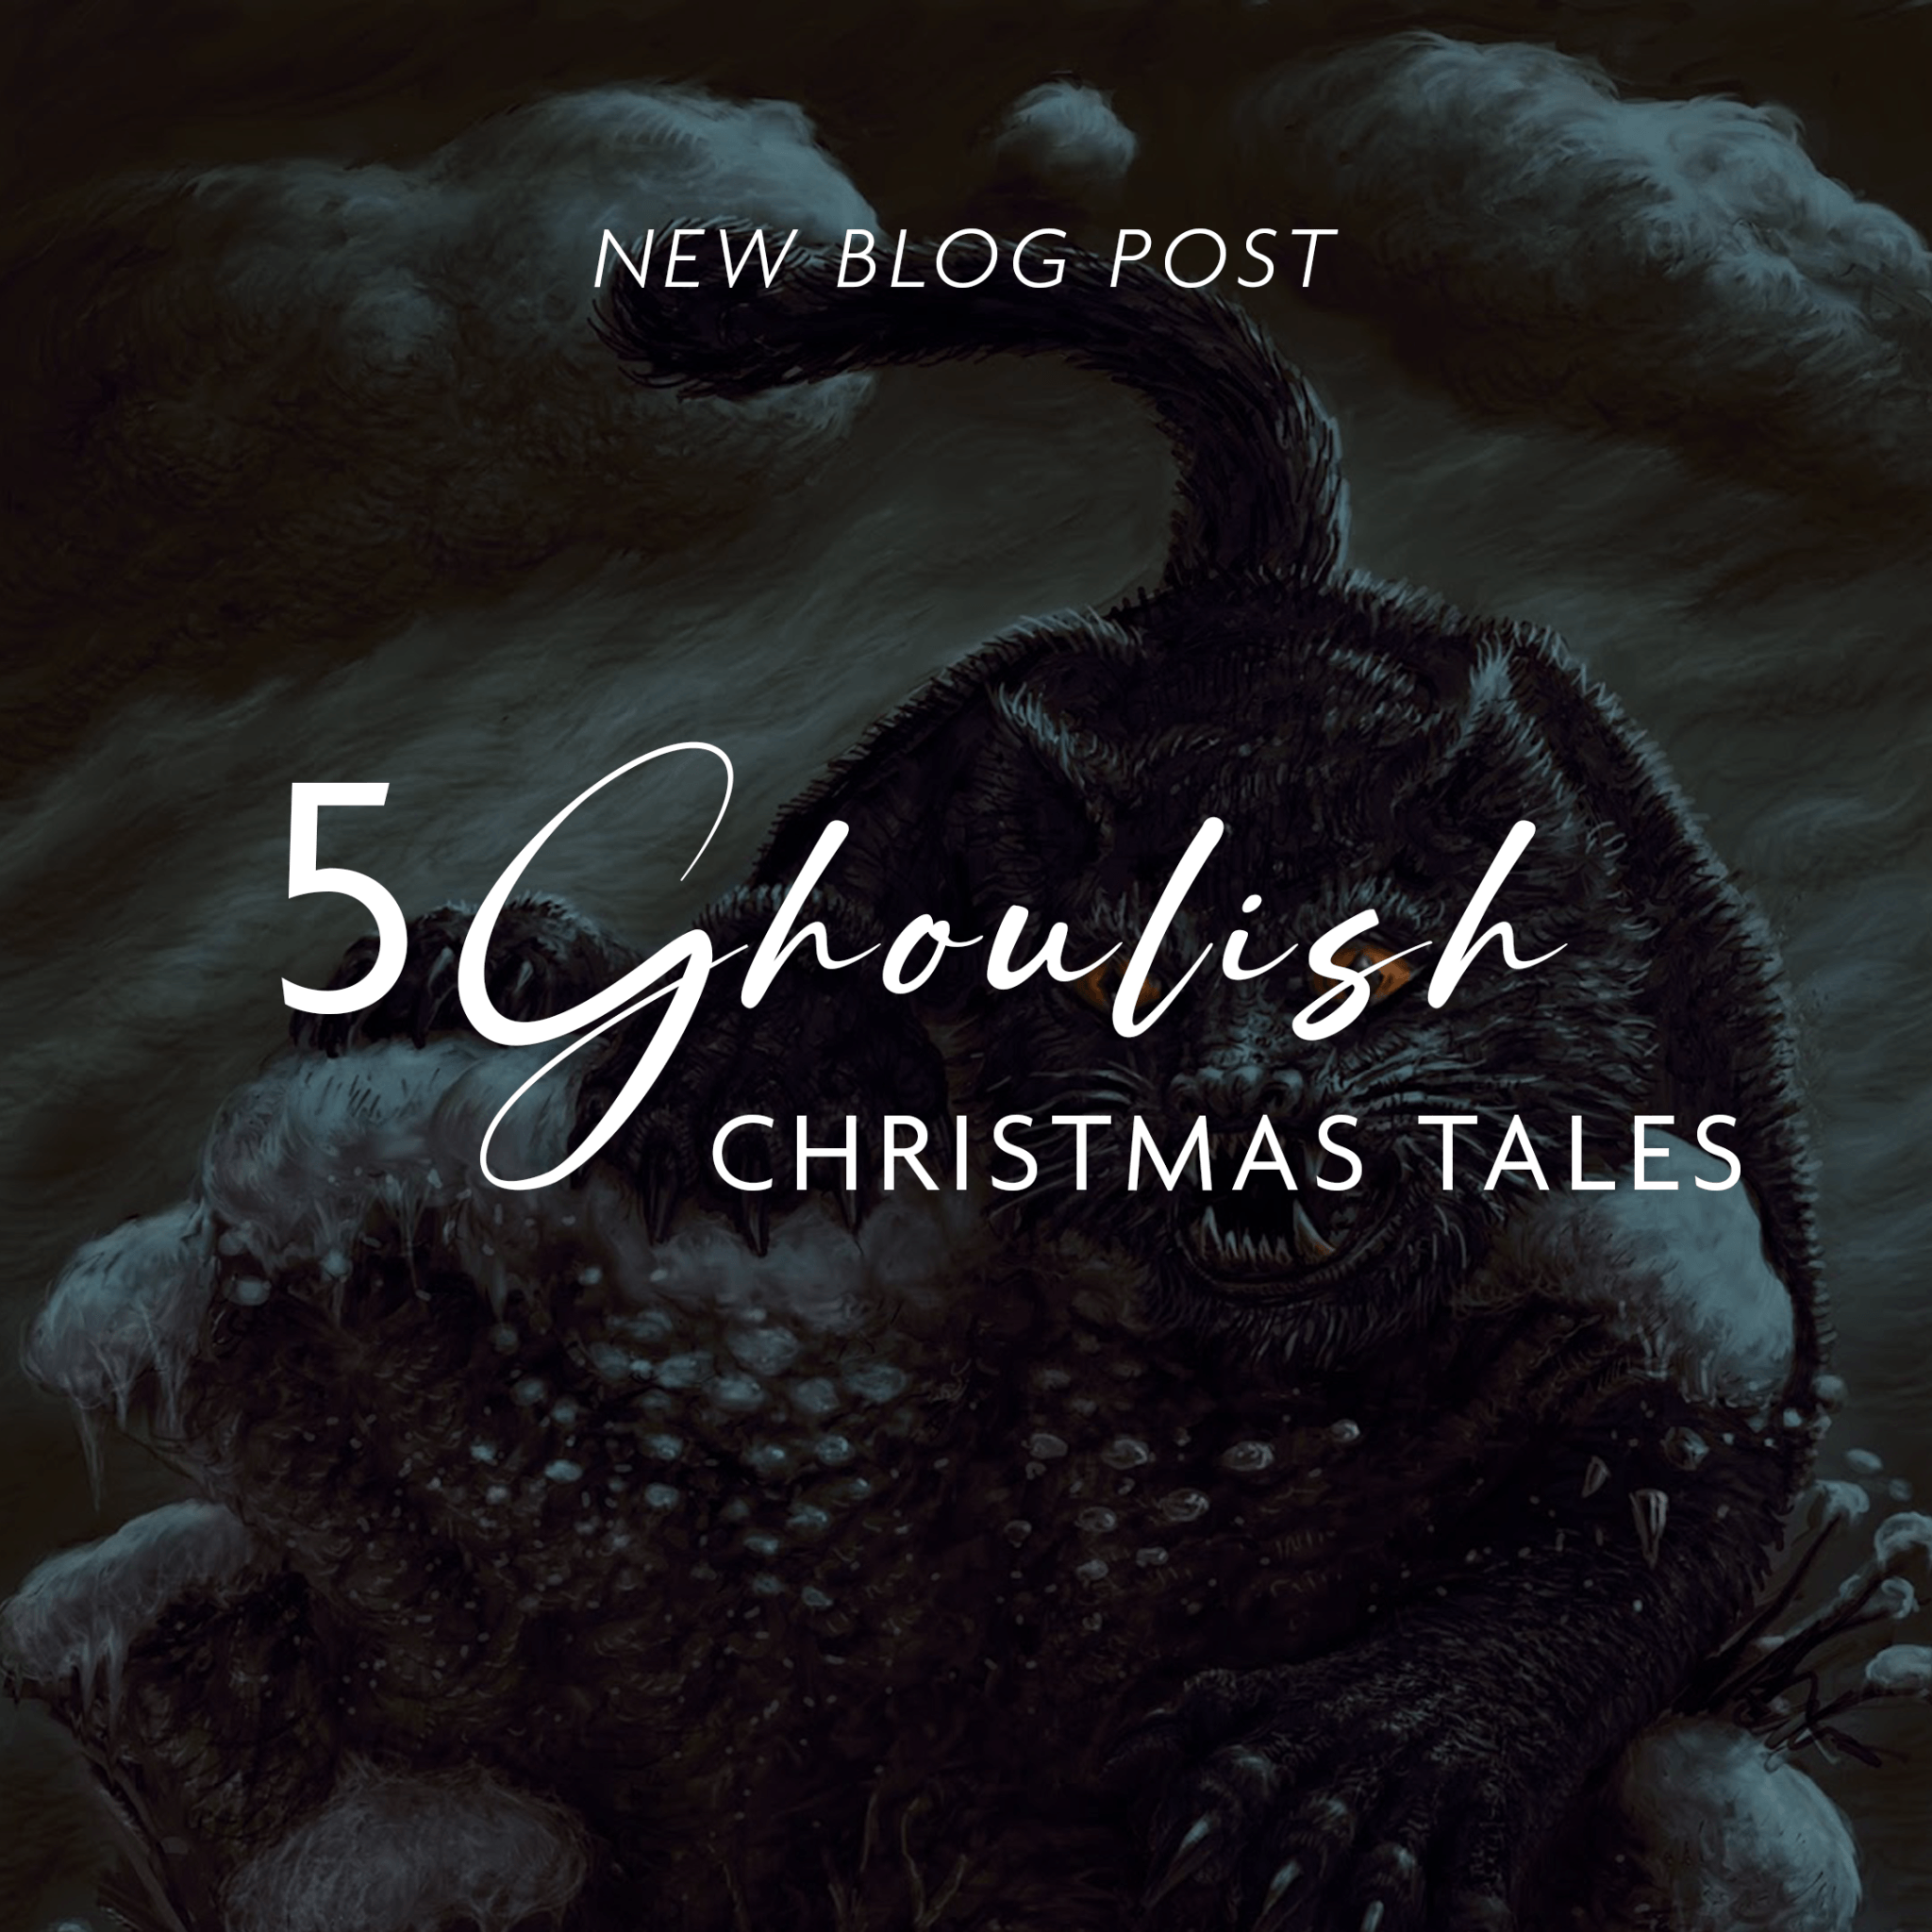 5 Ghoulish Christmas Tales with Roots in Pagan Traditions